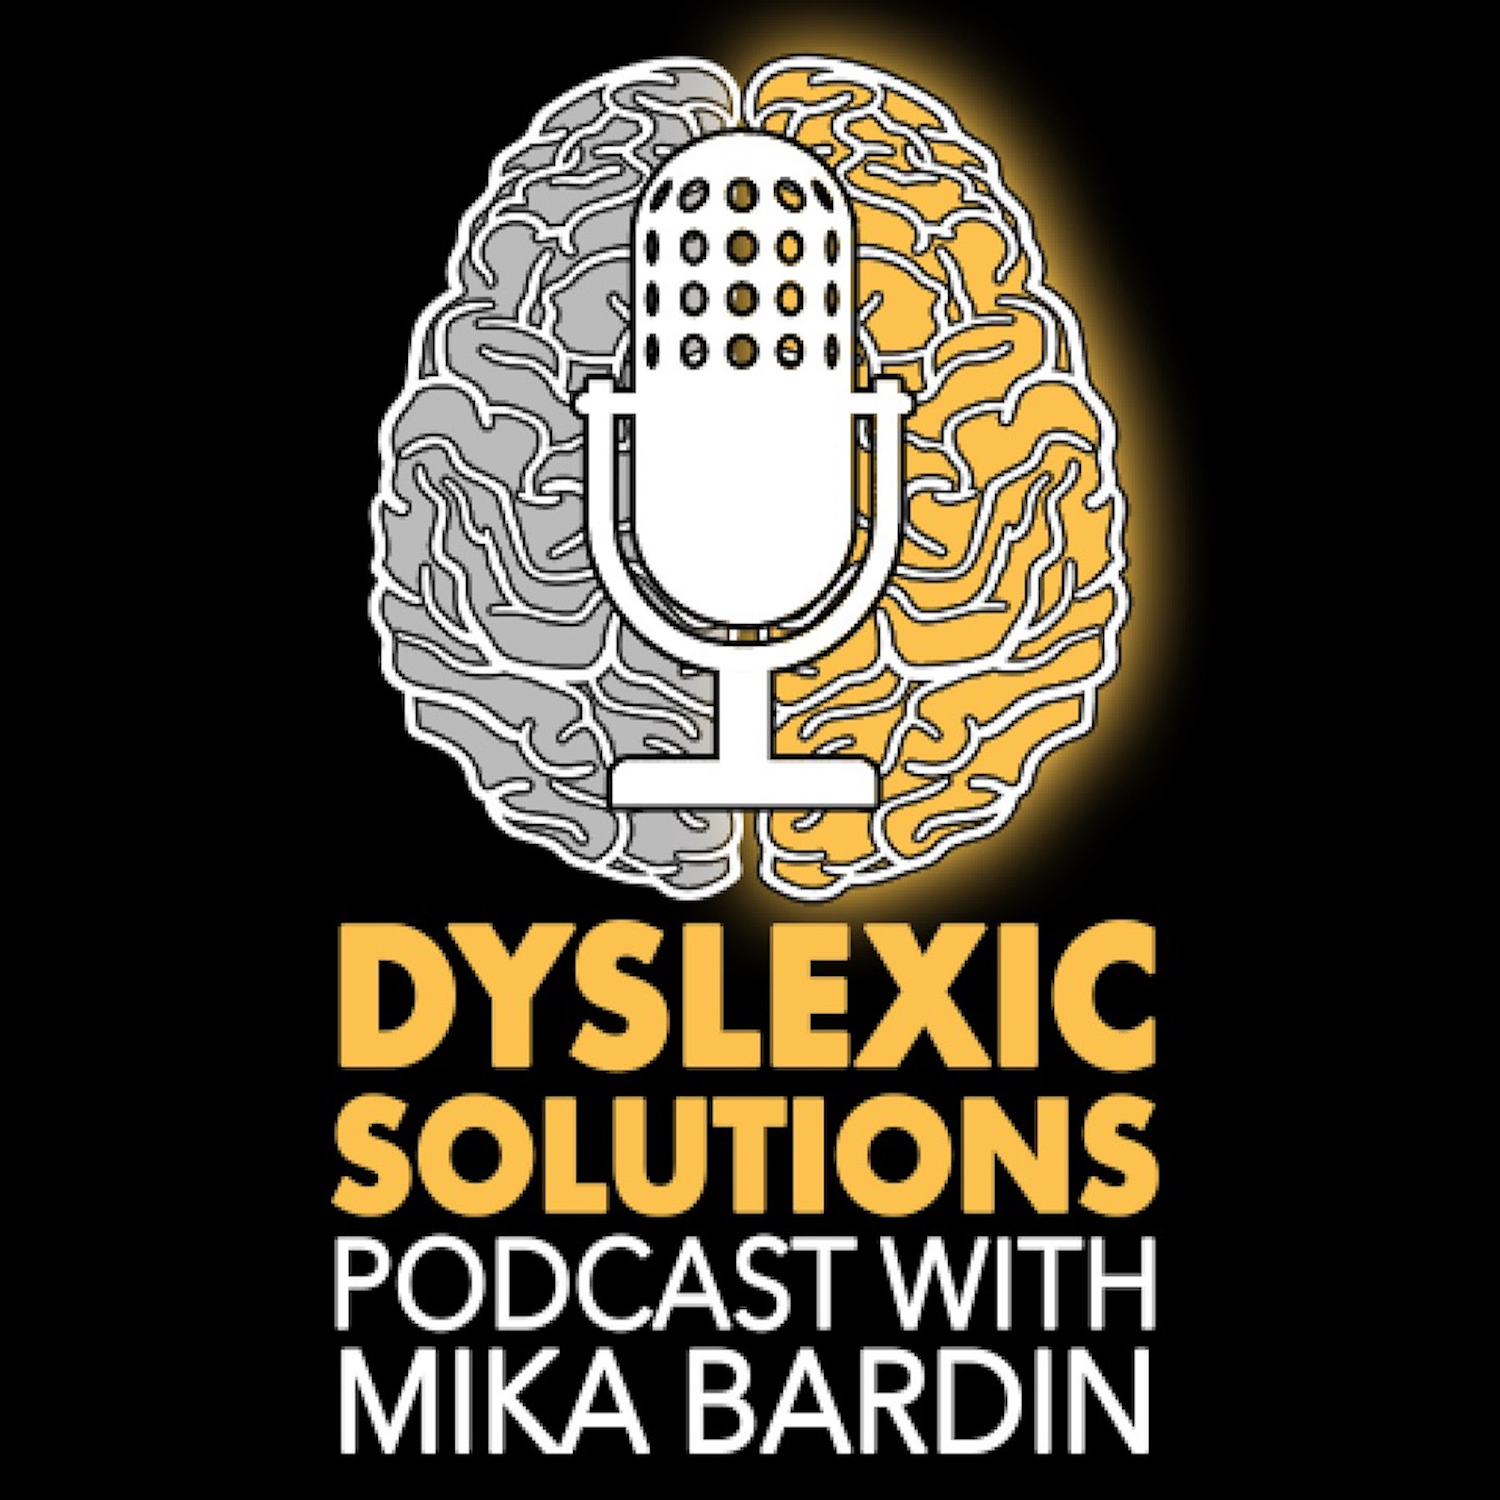 Dyslexic Solutions with Mika Bardin